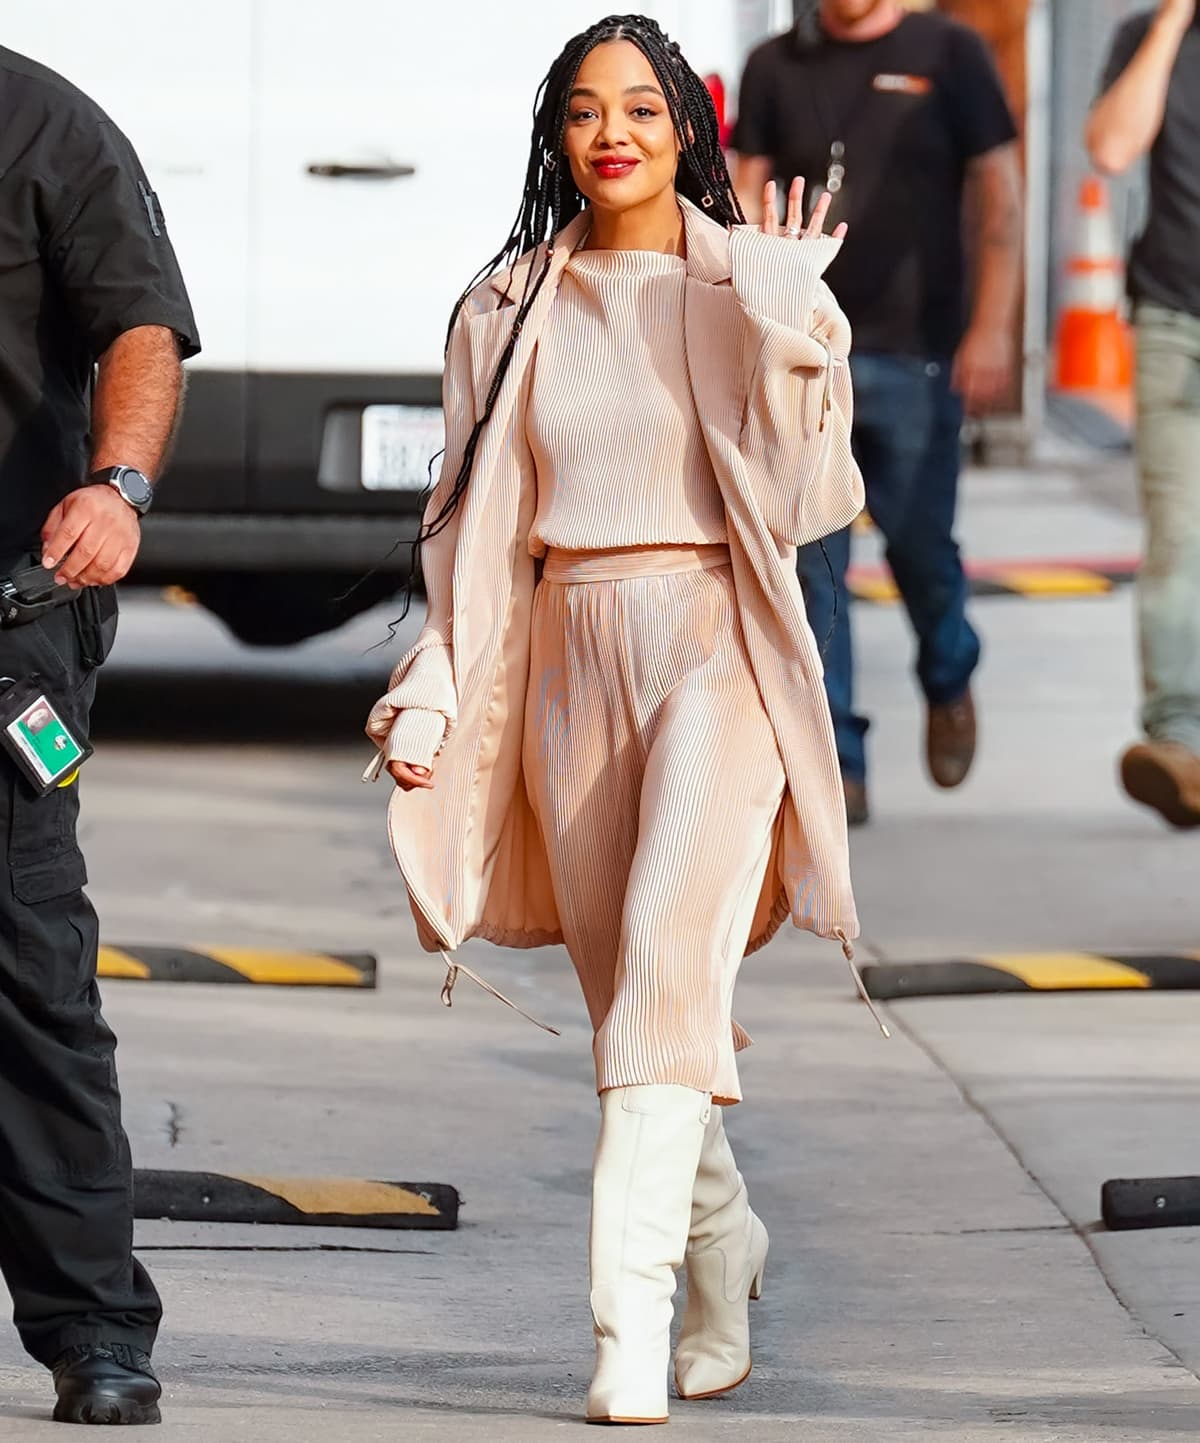 Tessa Thompson wears ivory Larroudé boots with Cong Tri culottes and a blazer while arriving for an appearance on "Jimmy Kimmel Live"